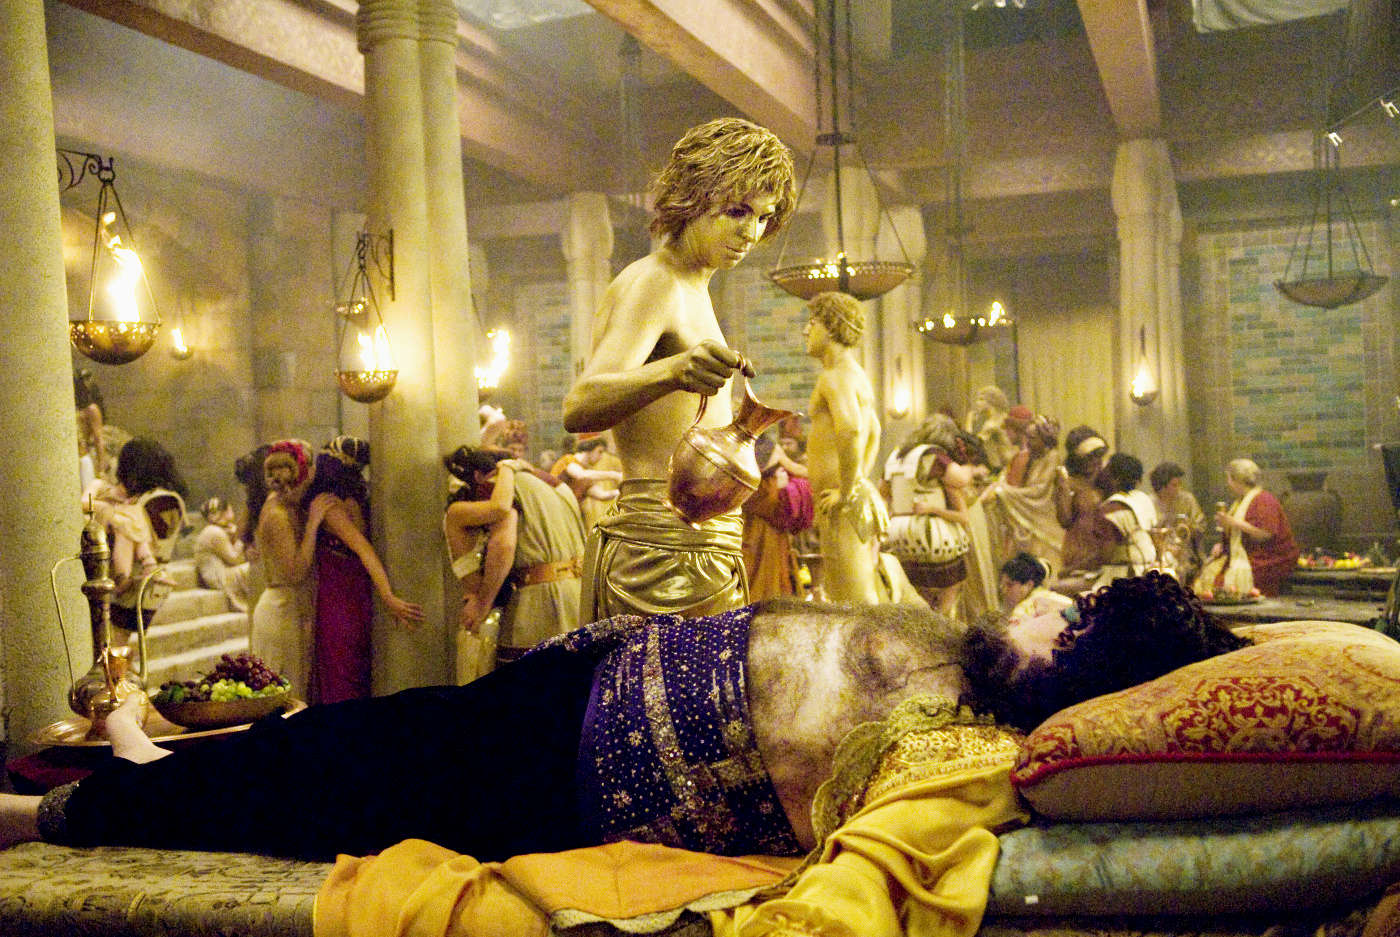 Michael Cera stars as Oh and Oliver Platt stars as High Priest in Columbia Pictures' Year One (2009)